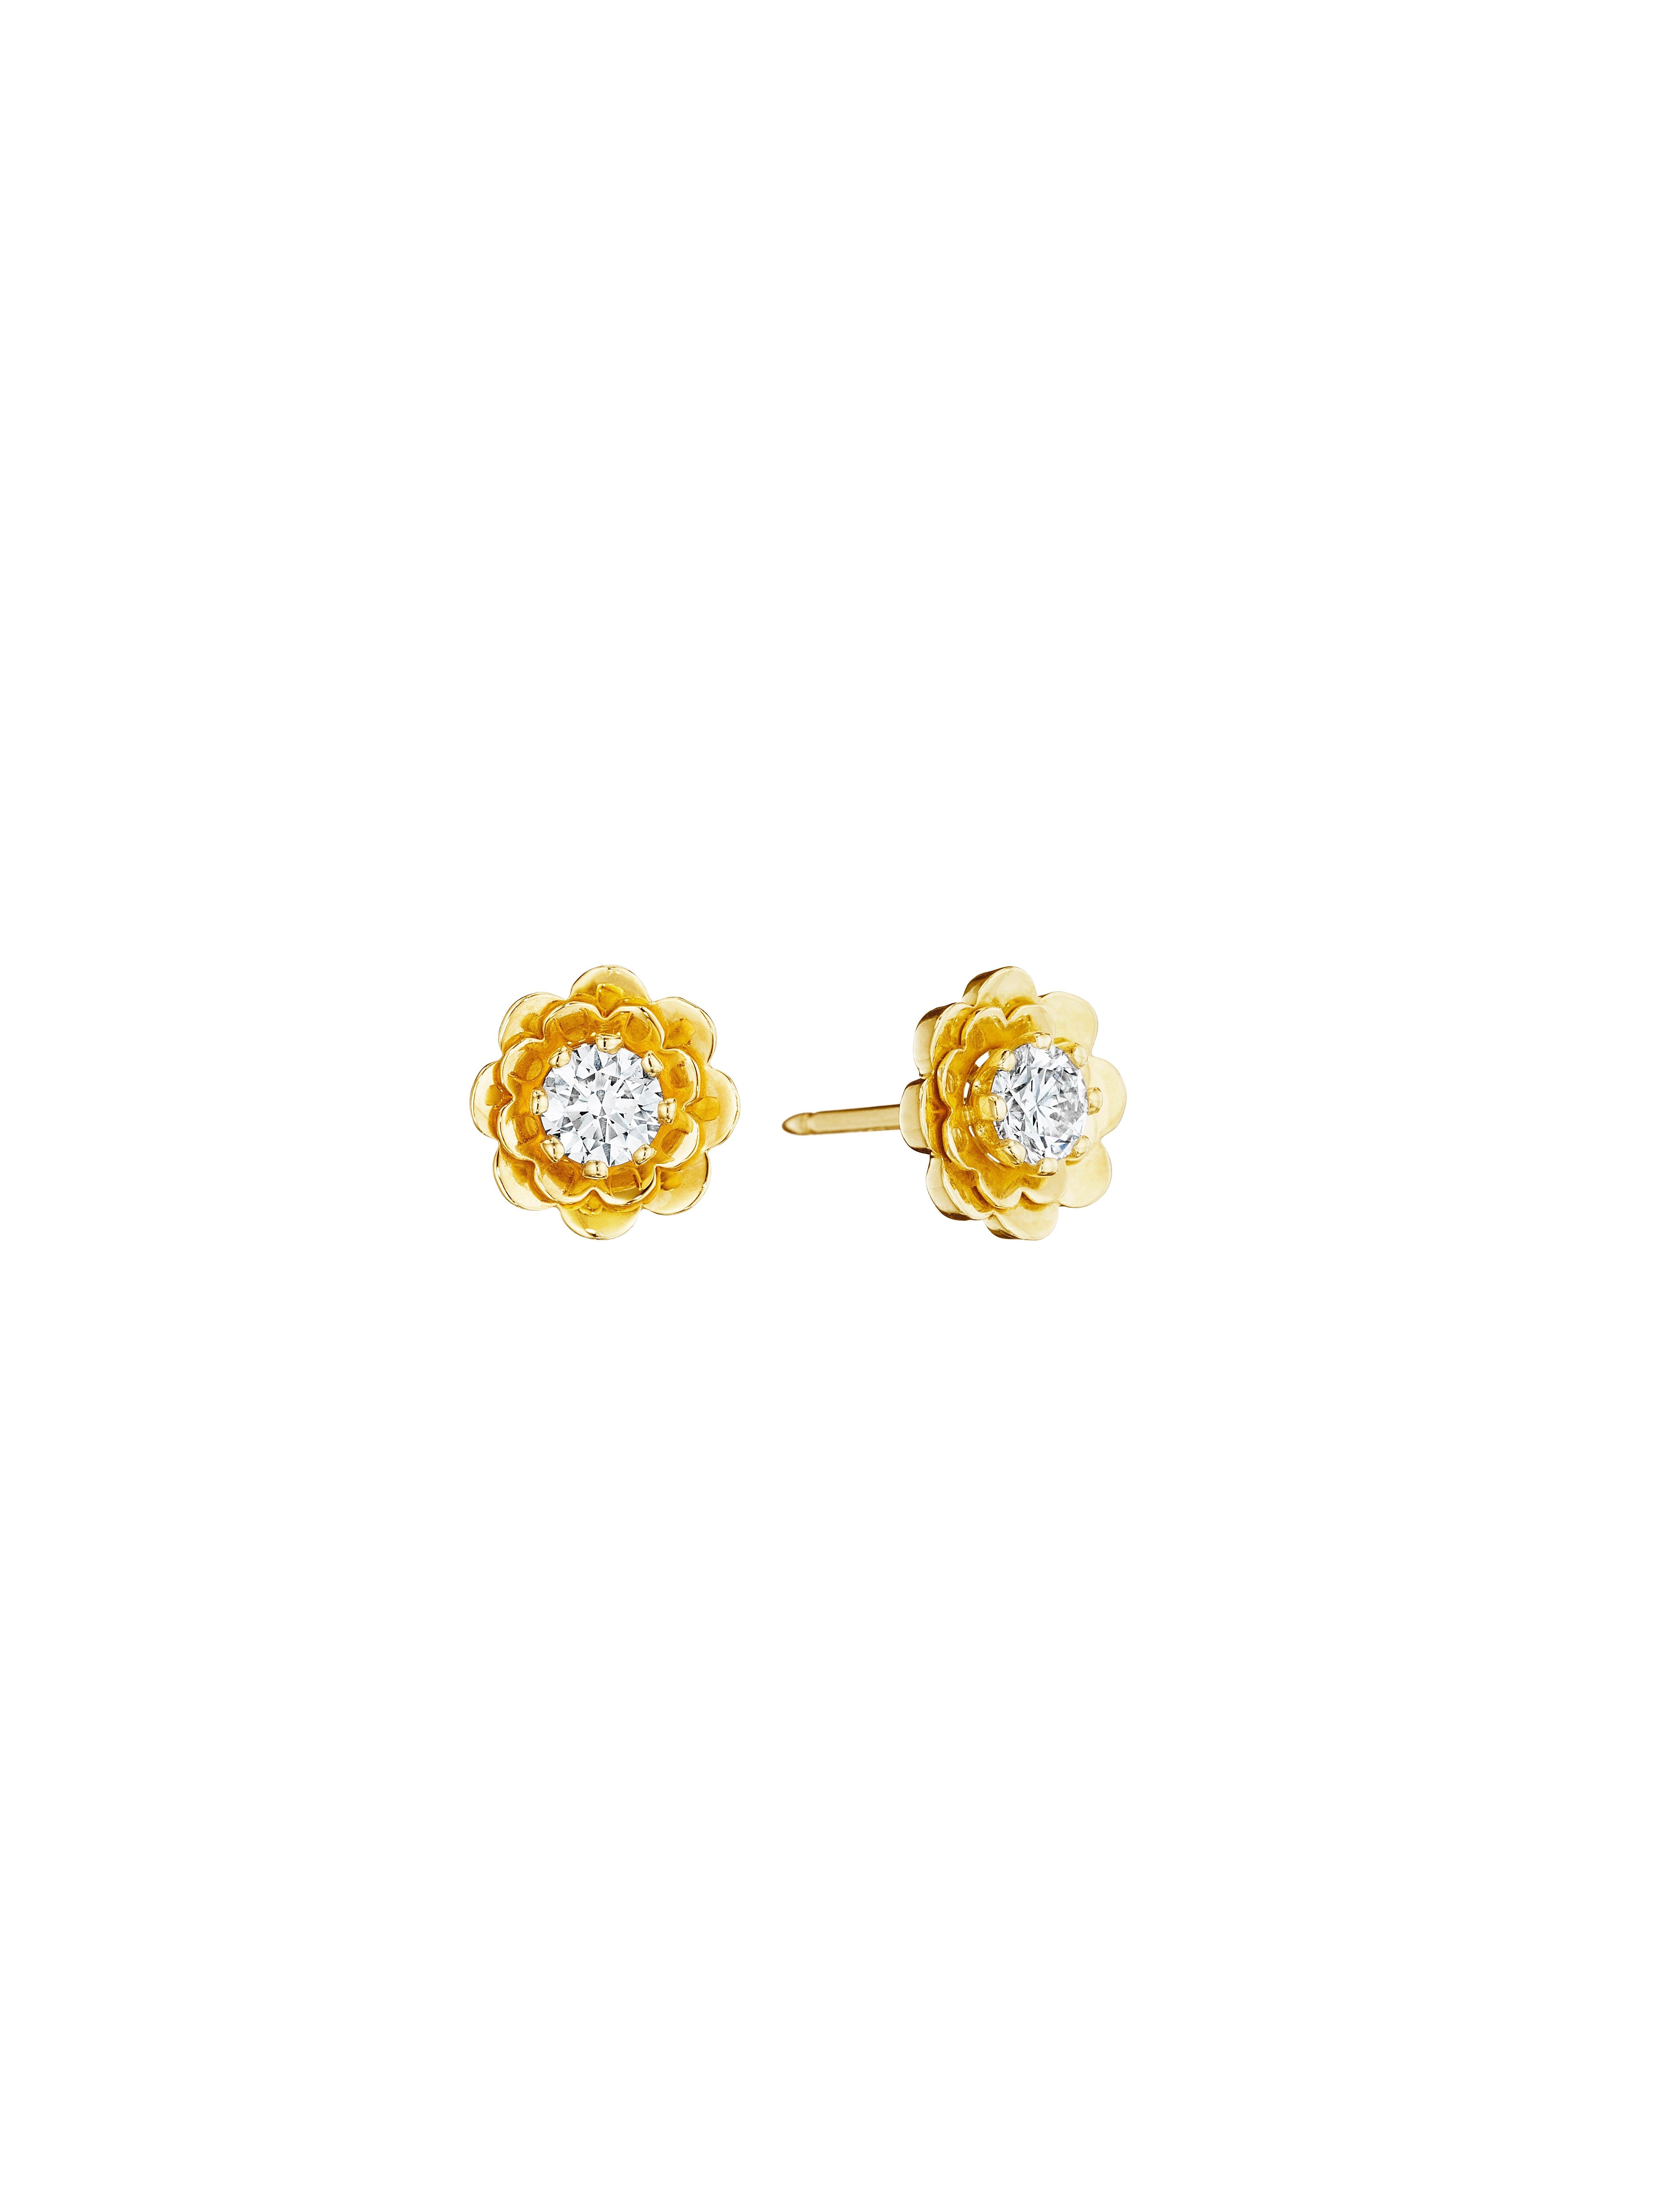 In full bloom. Elegance and high-voltage drama meet in these versatile earrings that can be worn as classic studs or elongated tassels. Handcrafted in 18k high polished gold and 3.44cttw white diamonds. GIA Certificate available.

From the CADAR